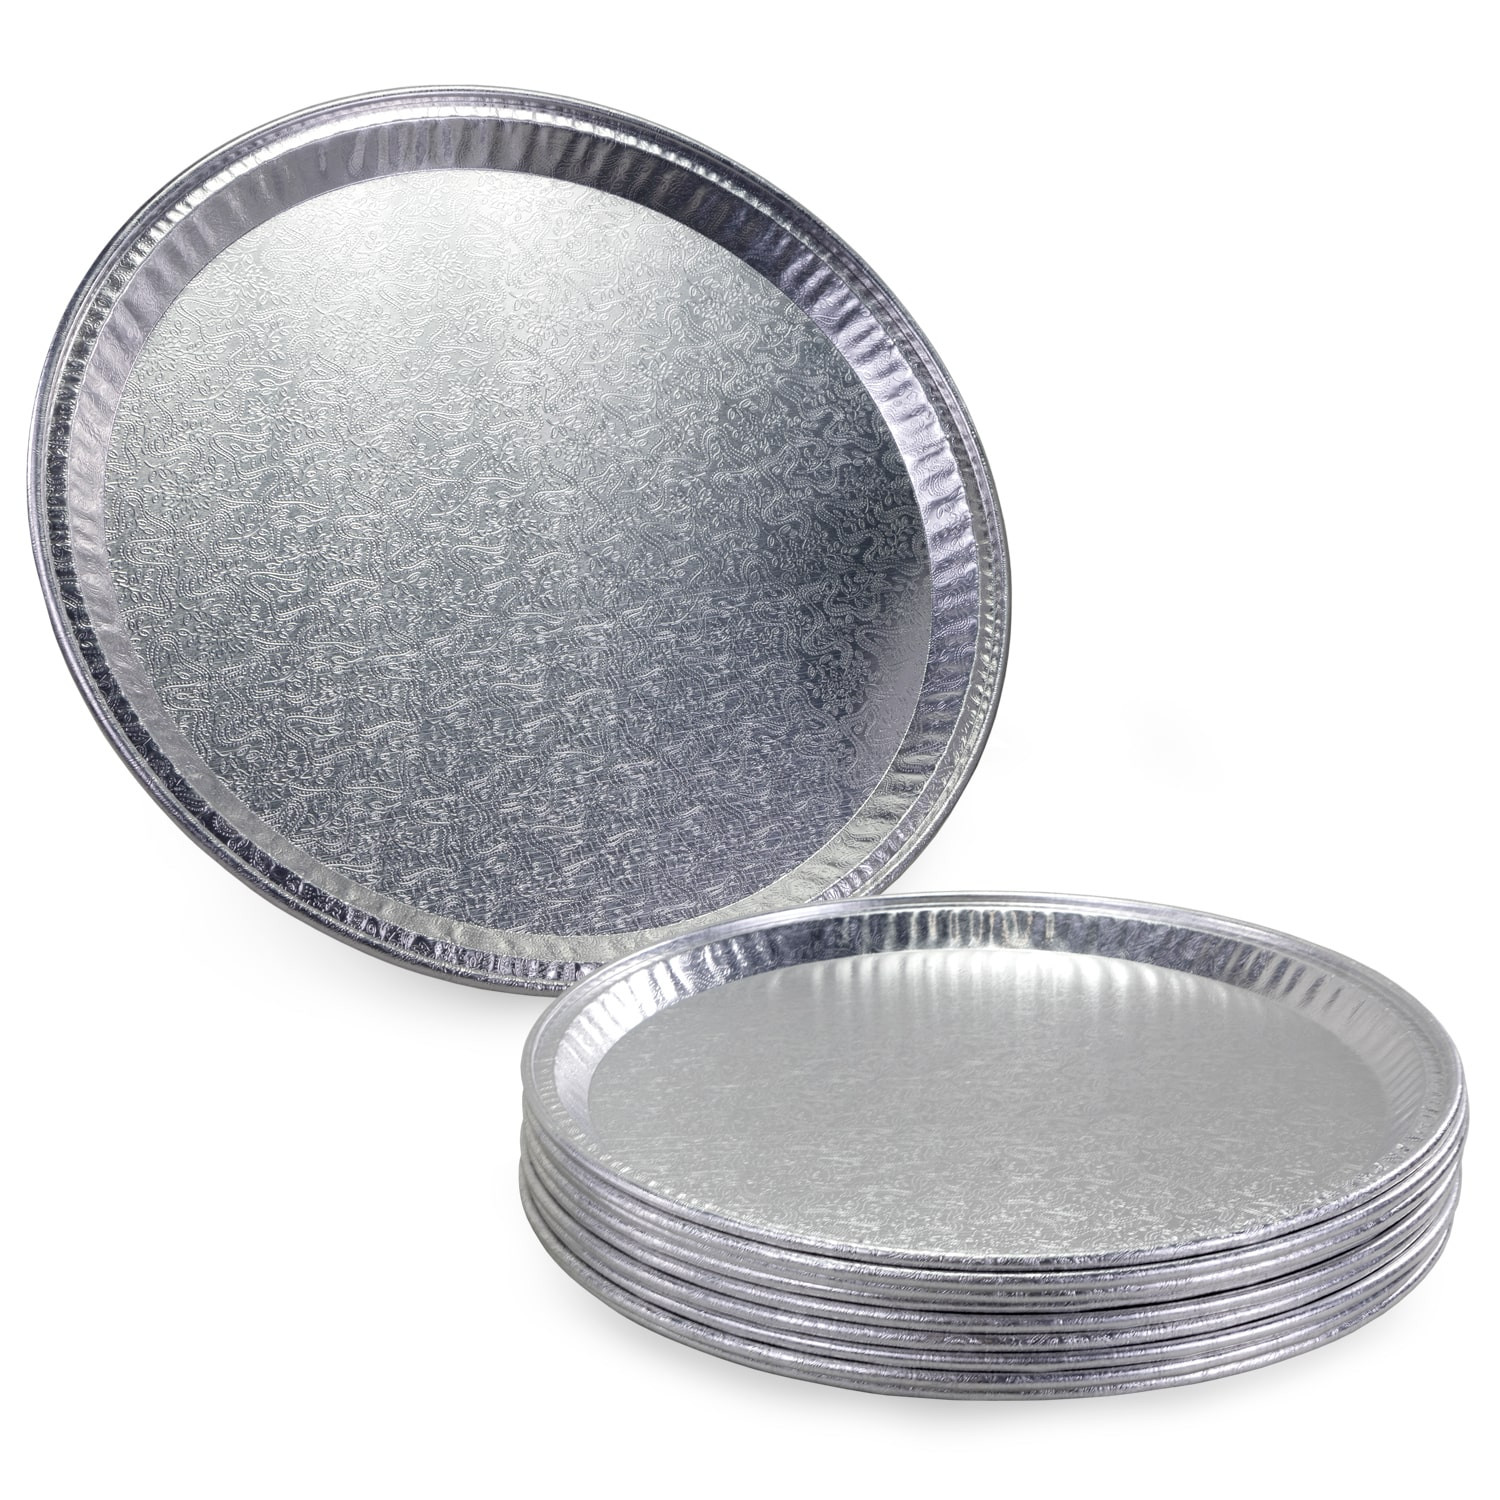 https://idlpack.com/image/cache/catalog/Products/Foil%20Pans%20and%20Trays/_MG_0009_1500-min-1500x1500.jpg